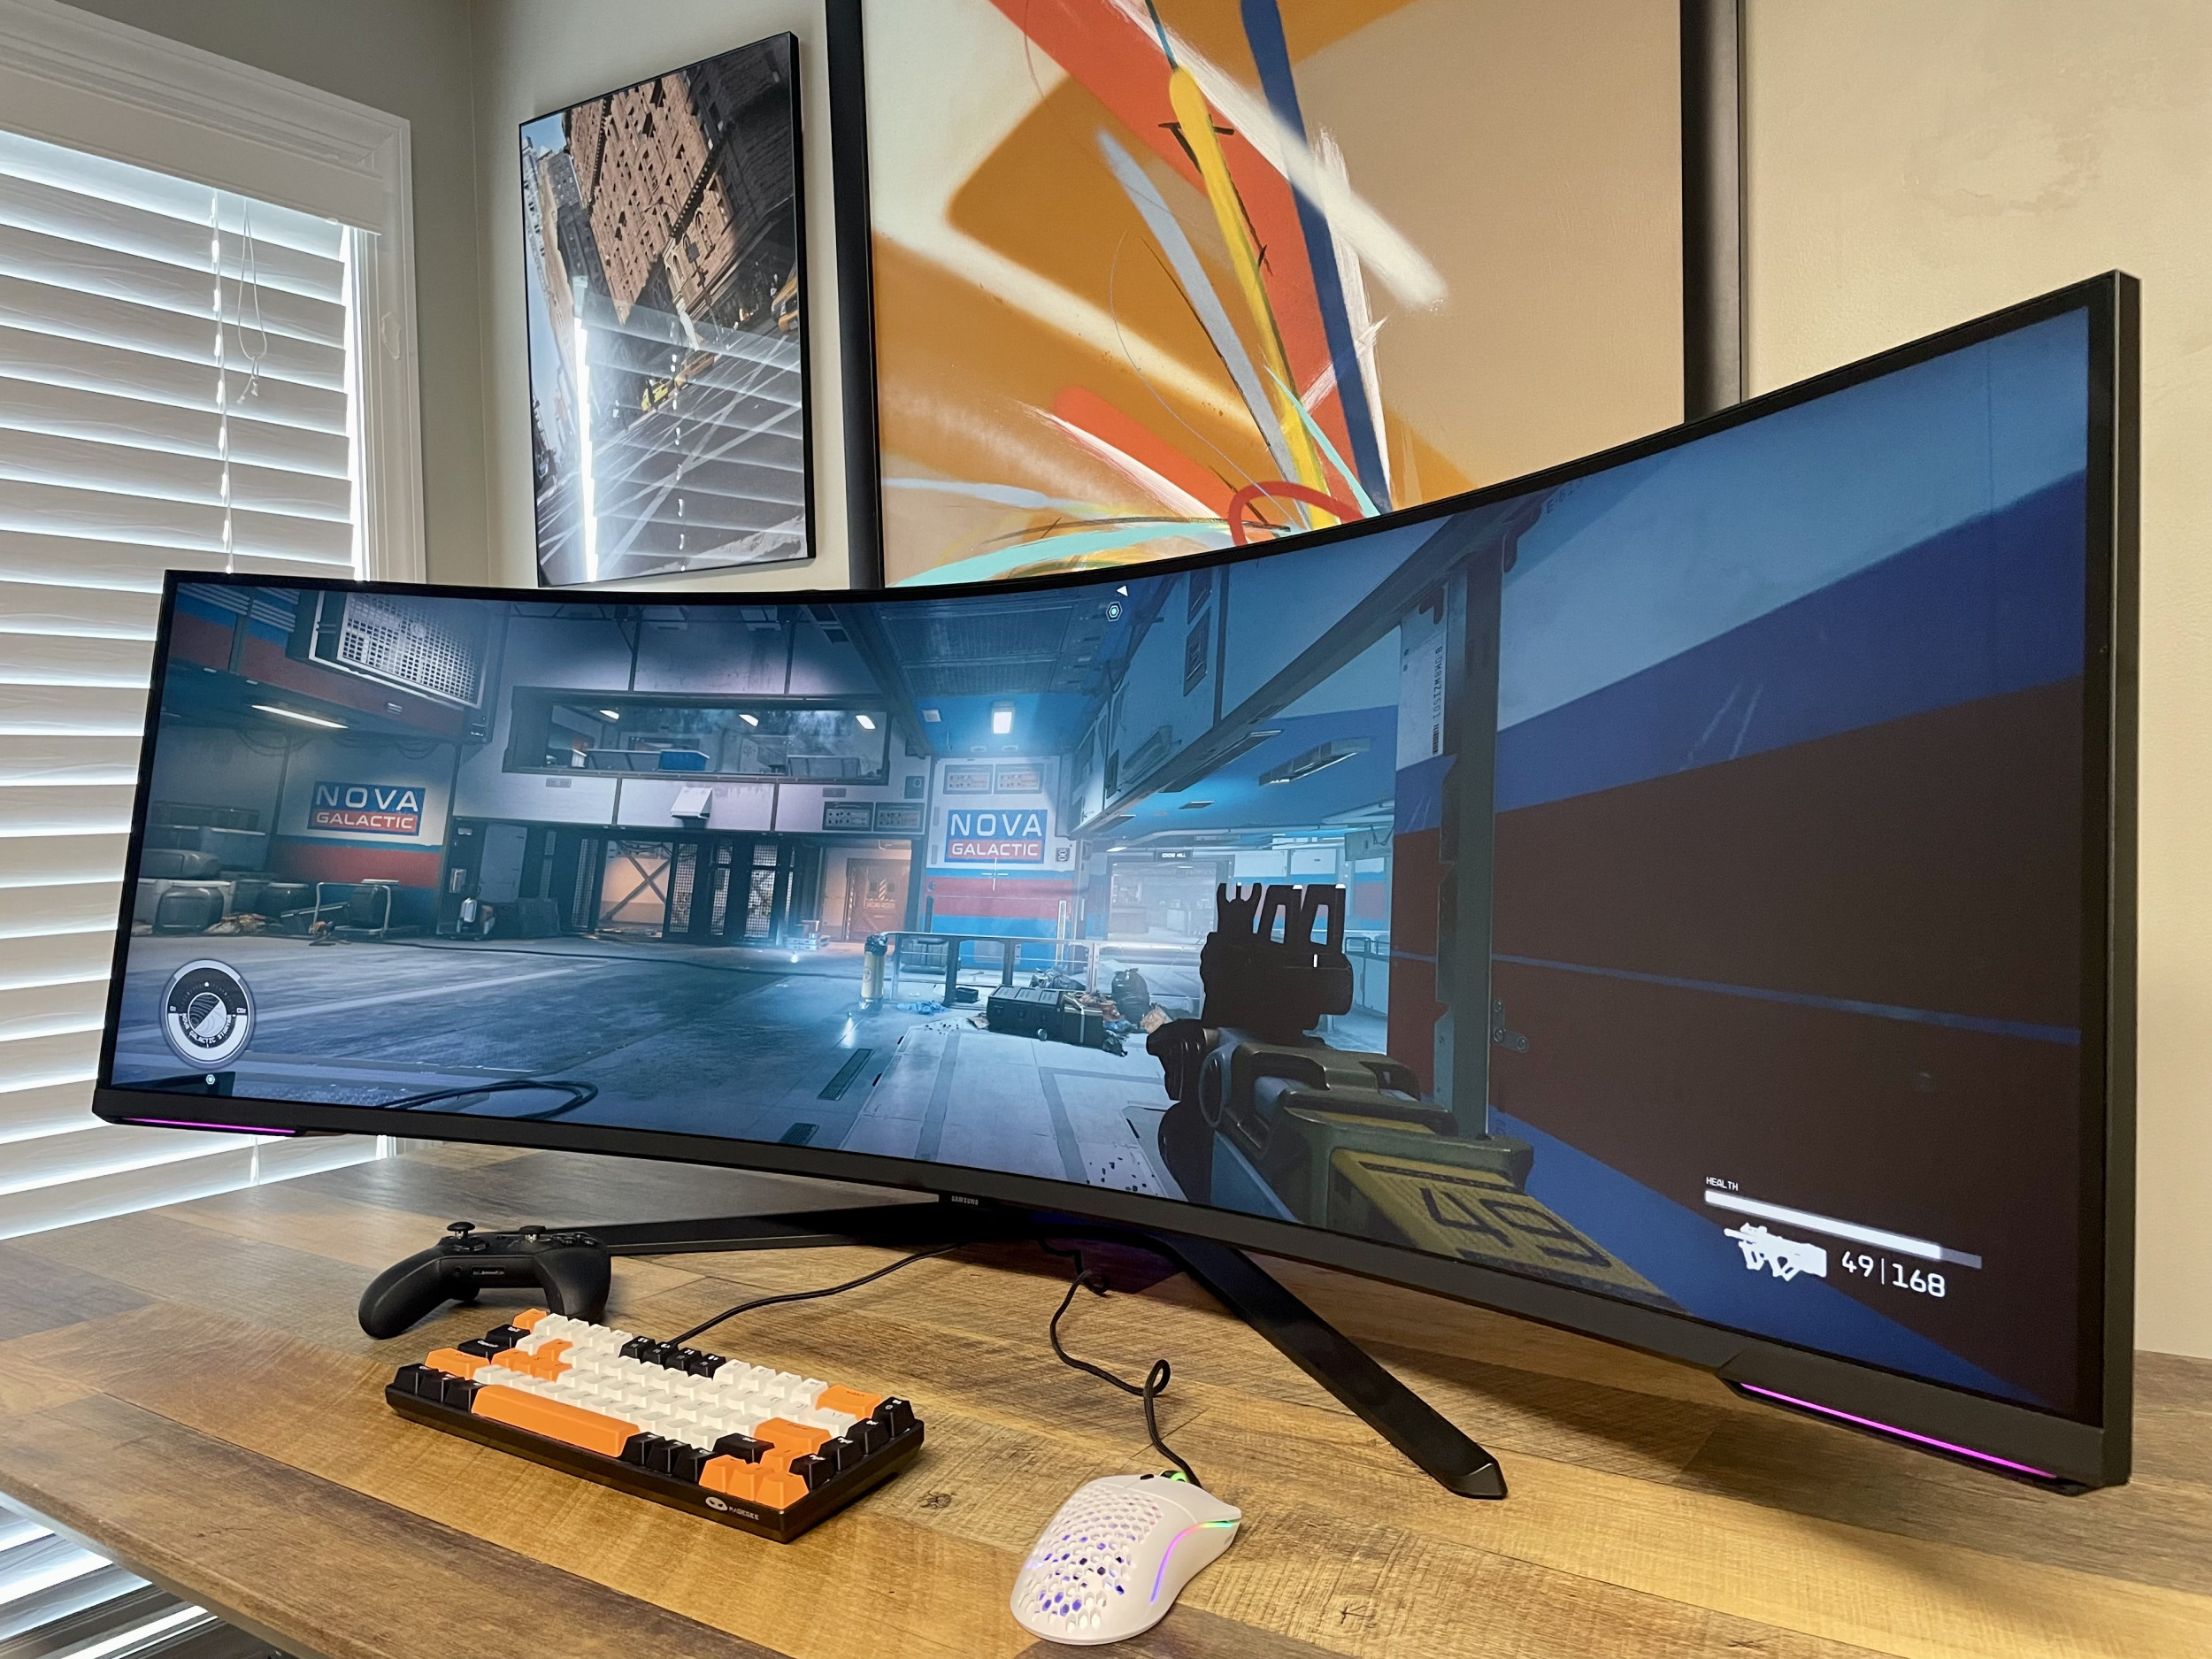 Samsung Odyssey Neo G9 57 Curved Gaming Monitor